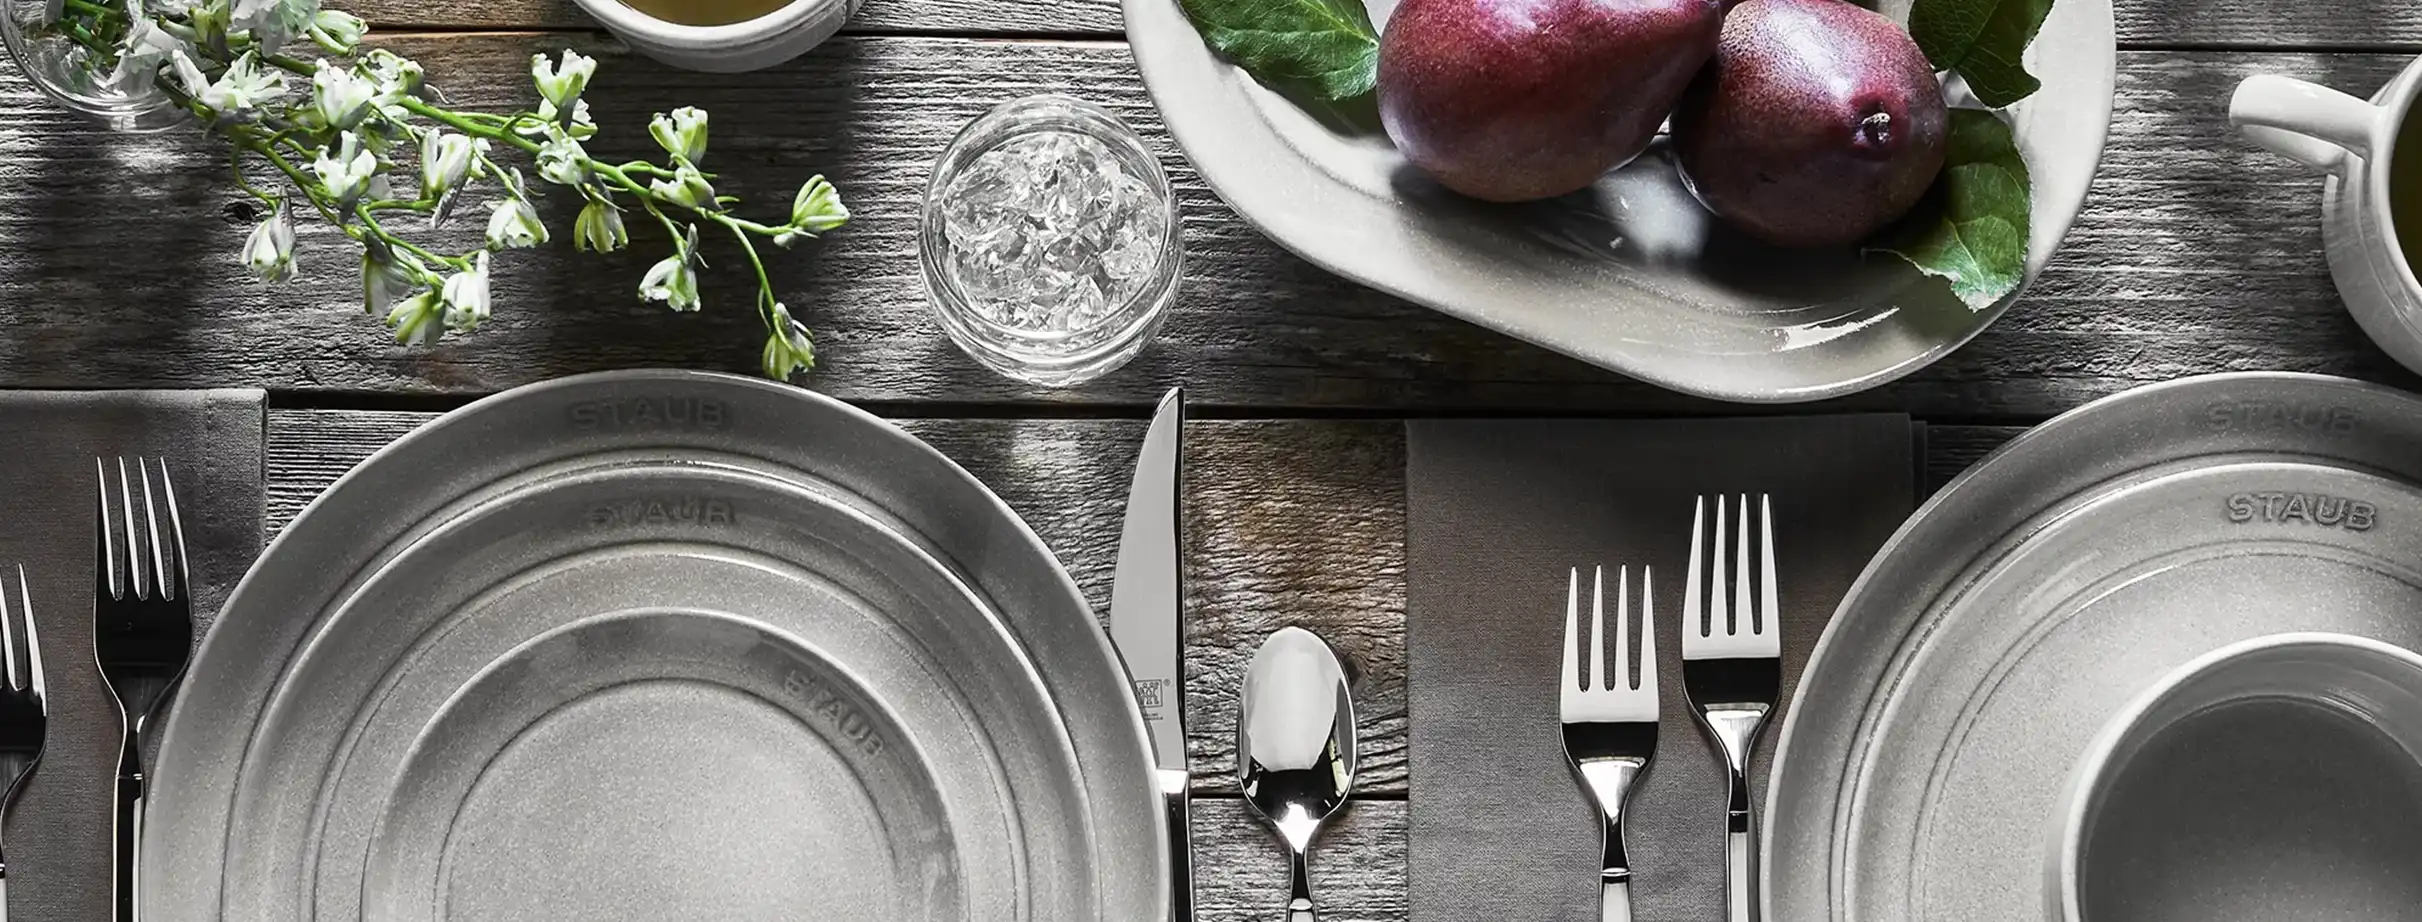 Create a Monochromatic Table Setting for the Holidays